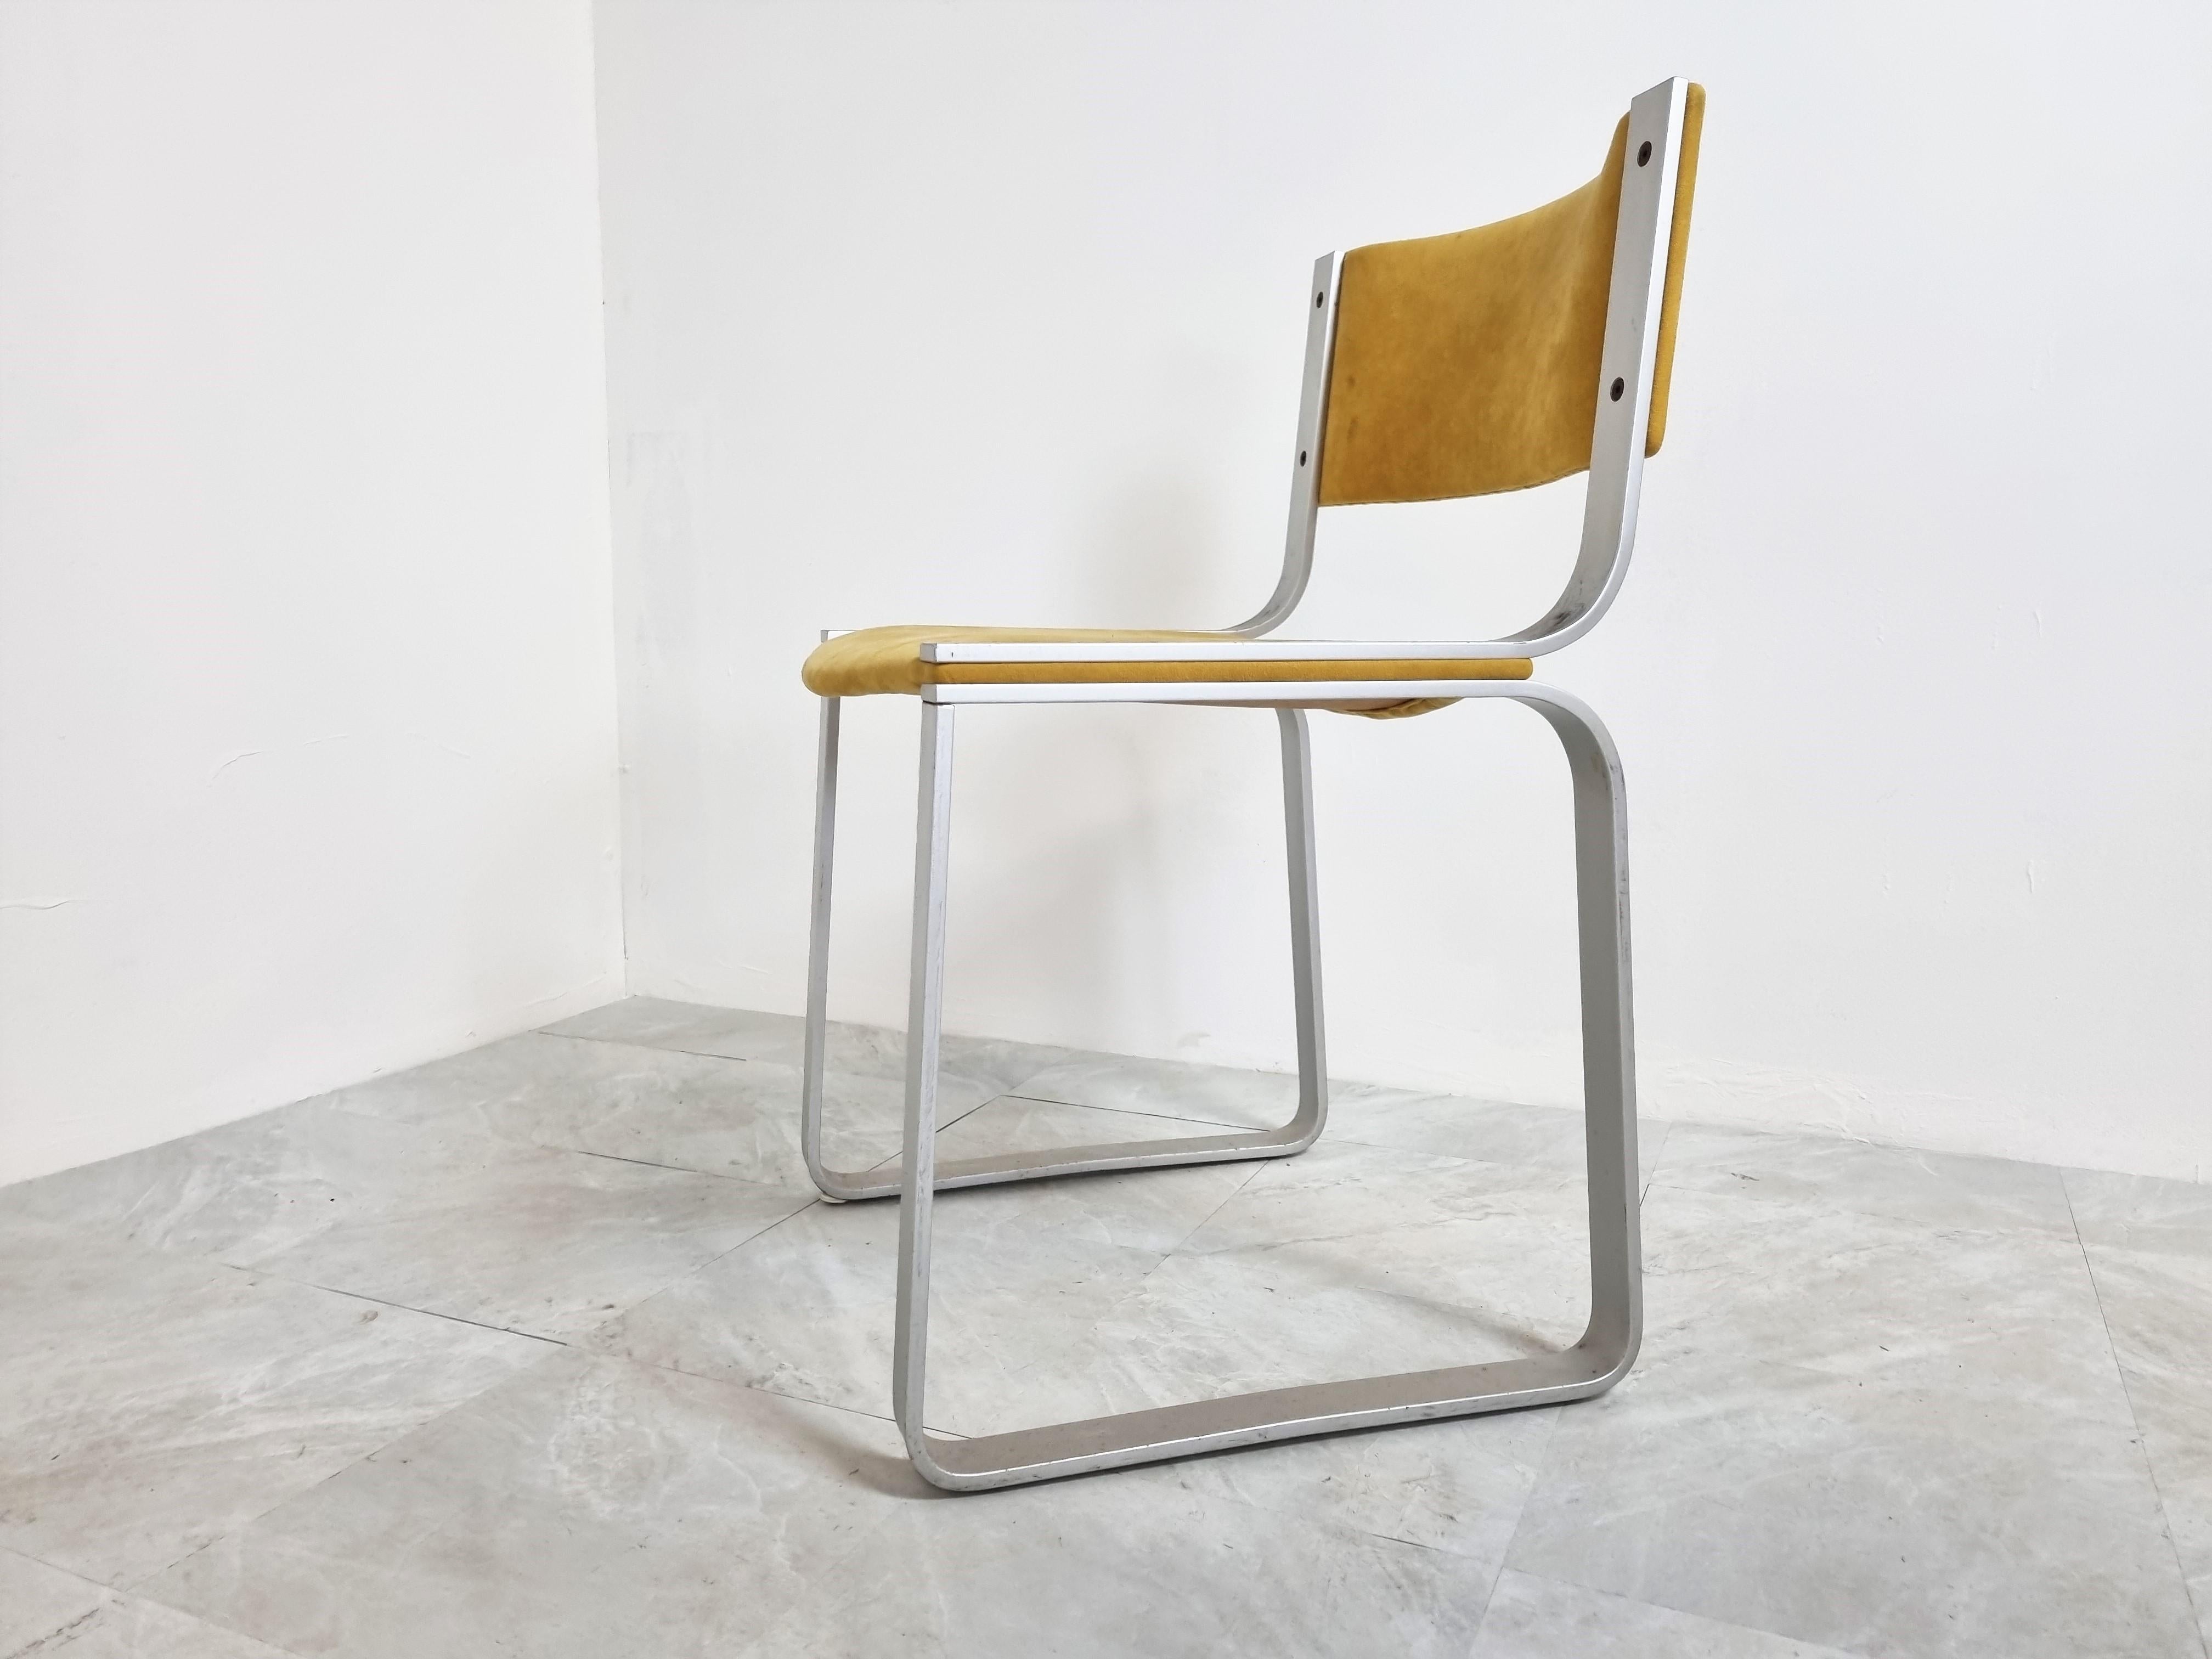 Modernist design dining chairs designed by Pierre Mazairac for Pastoe.

Aluminum frames with yellow alcantara upholstery.

Good condition with normal age related wear.

Great colour.

1970s - Netherlands

Dimensions: 
Height: 76cm/29.92